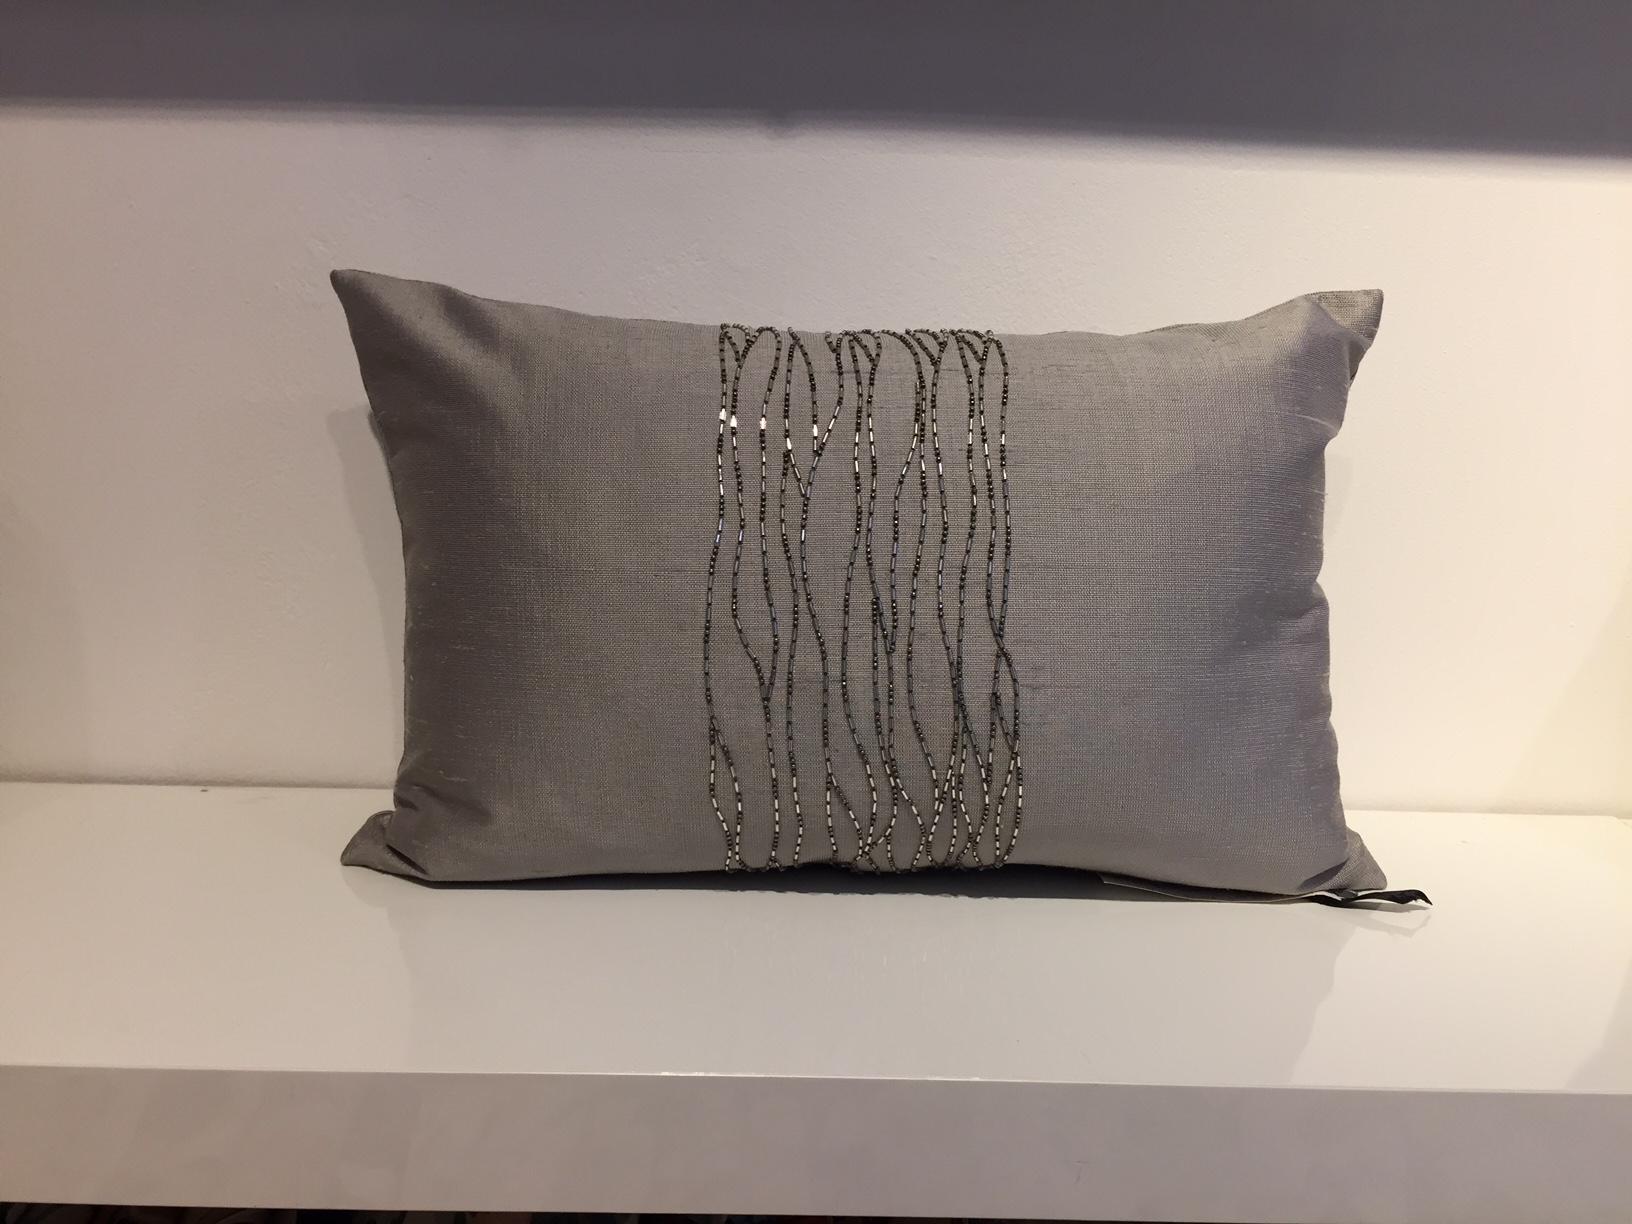 One set of cushions, 2 piece, size: 30 x 45cm,
Hand embroidery with silver beads, contemporary design on handwoven silk color light silver,
Cushion cover with cotton lining and concealed zipper in the bottom seam,
Inner pad with new feathers.